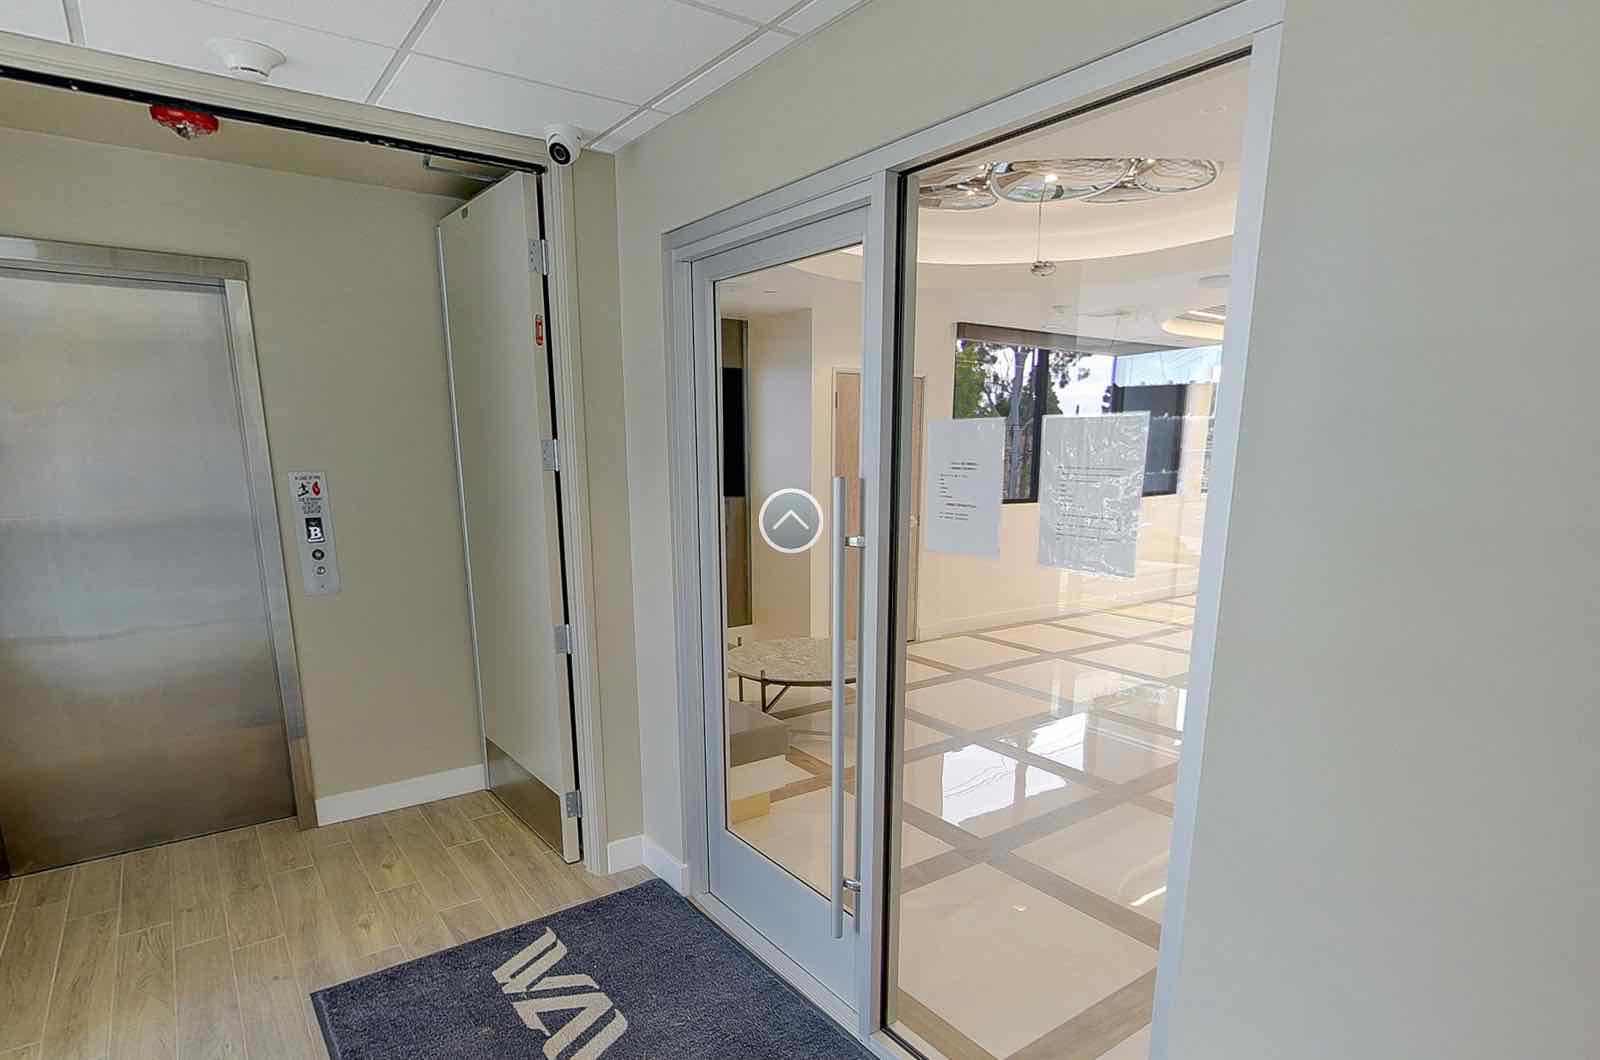 360 Virtual Tours for Offices and Health Offices